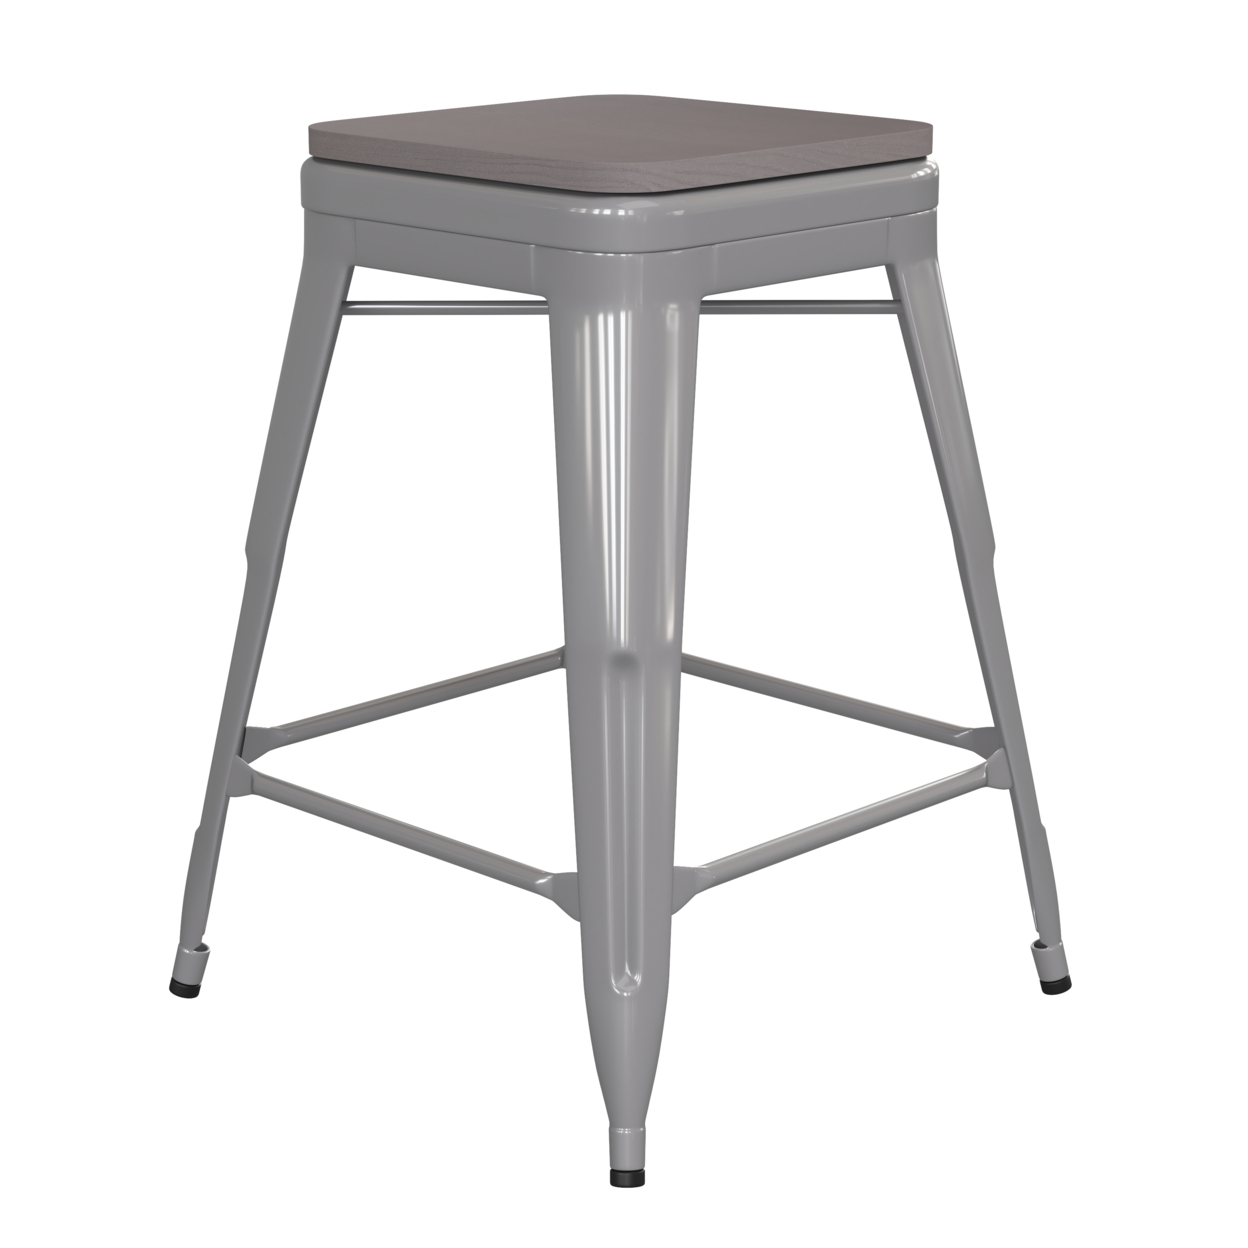 24 Inch Metal Stool, Thick Wood Seat, Silver